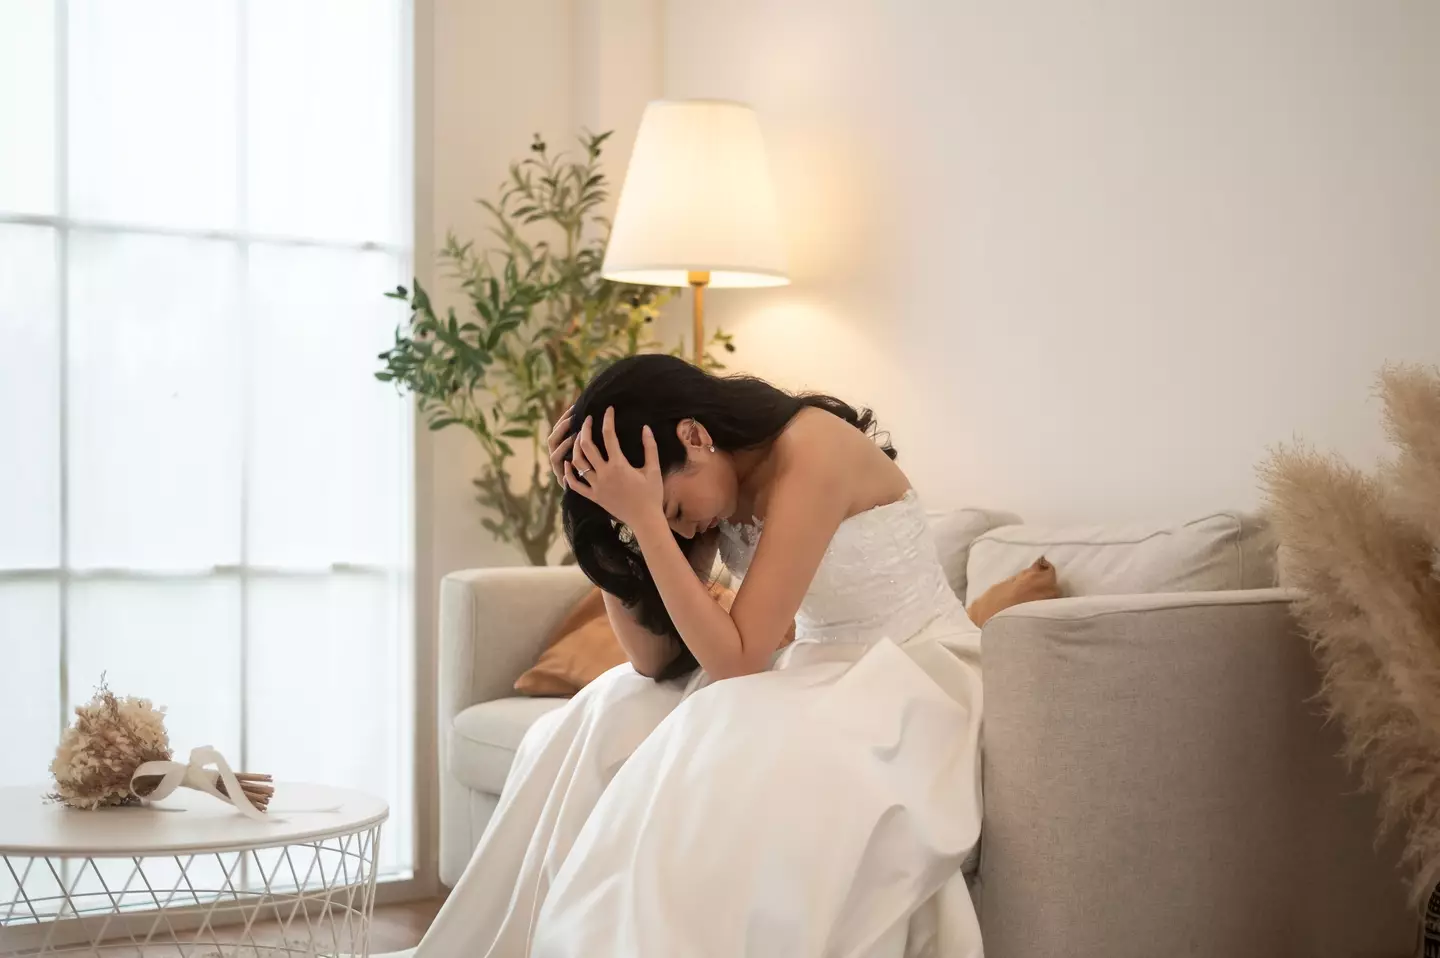 The bride received a devastating text just hours before her wedding.